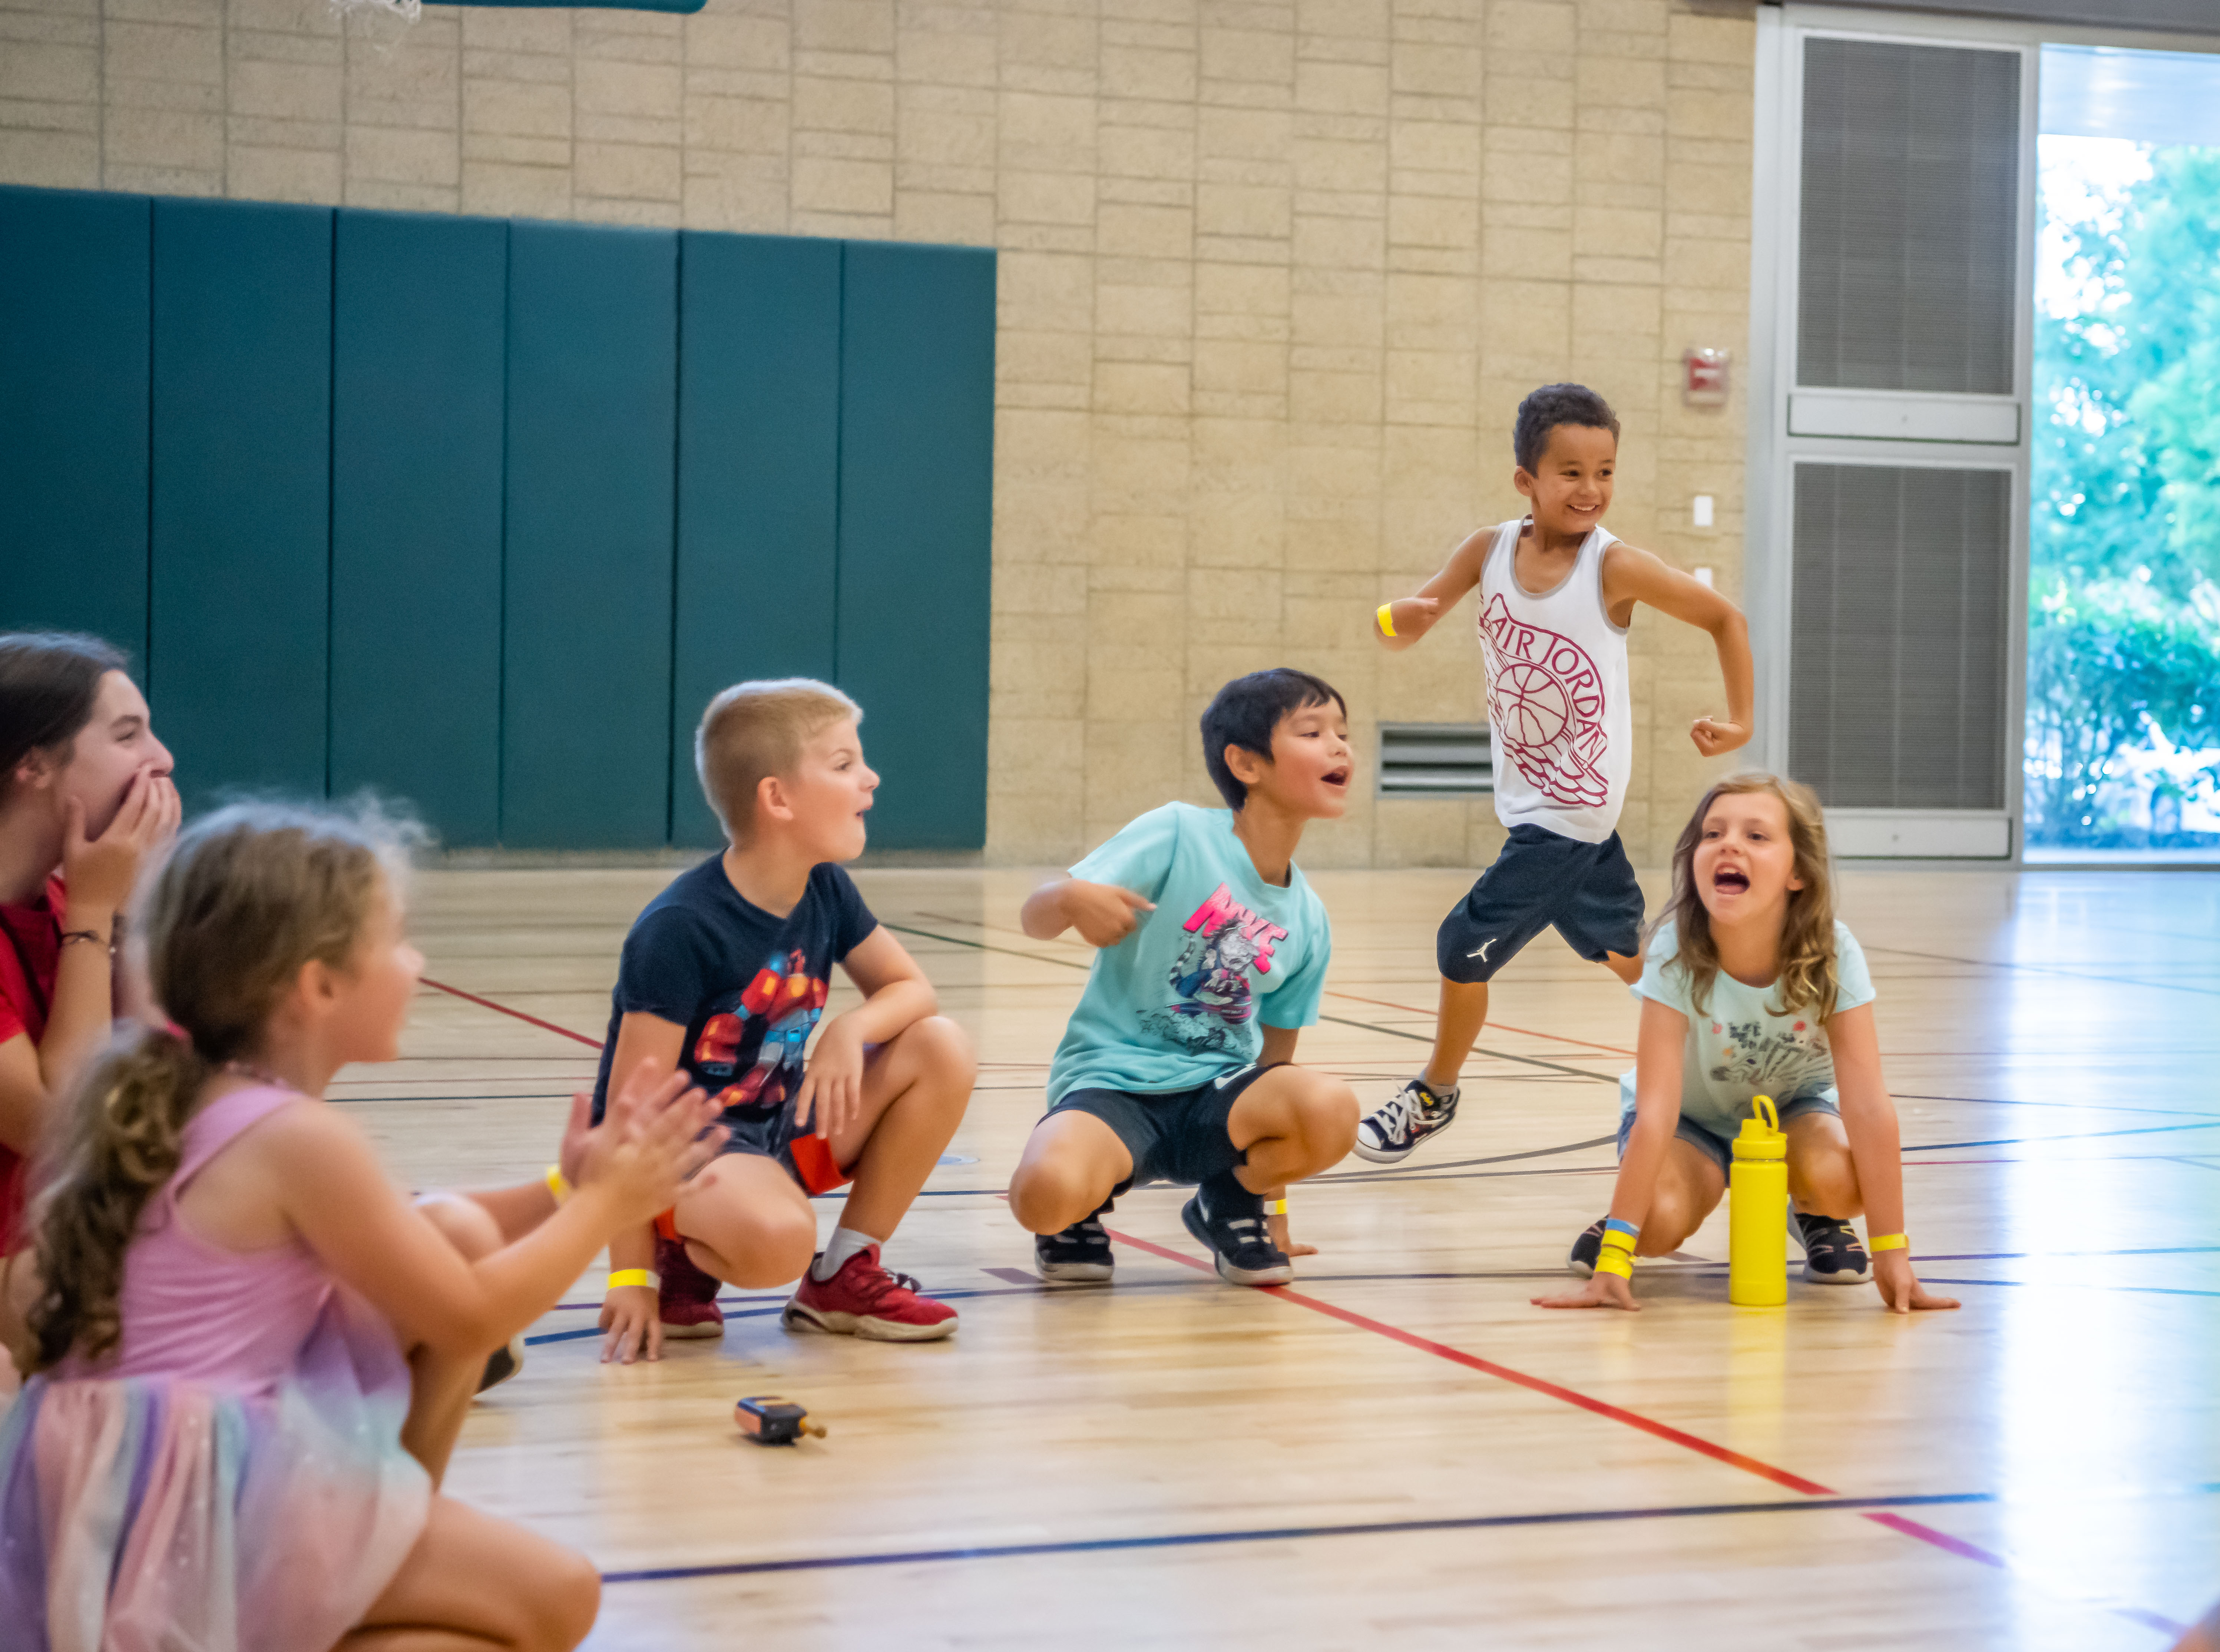 A group of young kids sitting on a gym floor, playing duck-duck-goose